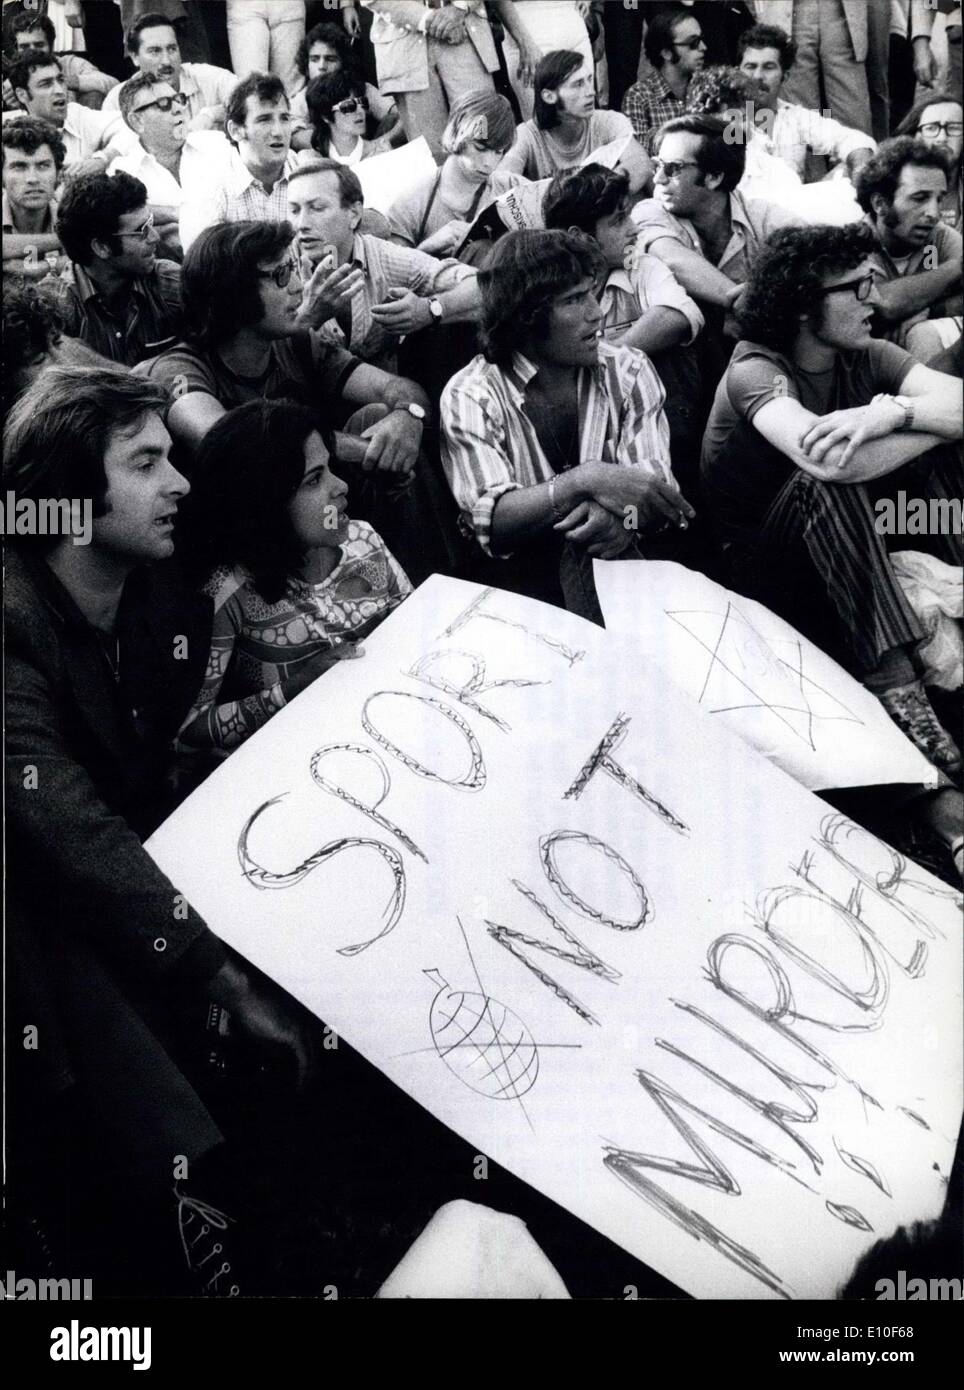 Sep. 06, 1972 - Massacre In Munich Ops:- The demonstration taking place after the attempt at the Oberwiesenfeld in Munich. Hundreds of people demanded on posters ''Stop the Games'' and ''Sport not Murder'' protesting against the cruel crimes which has abruptly interrupted the games. Stock Photo